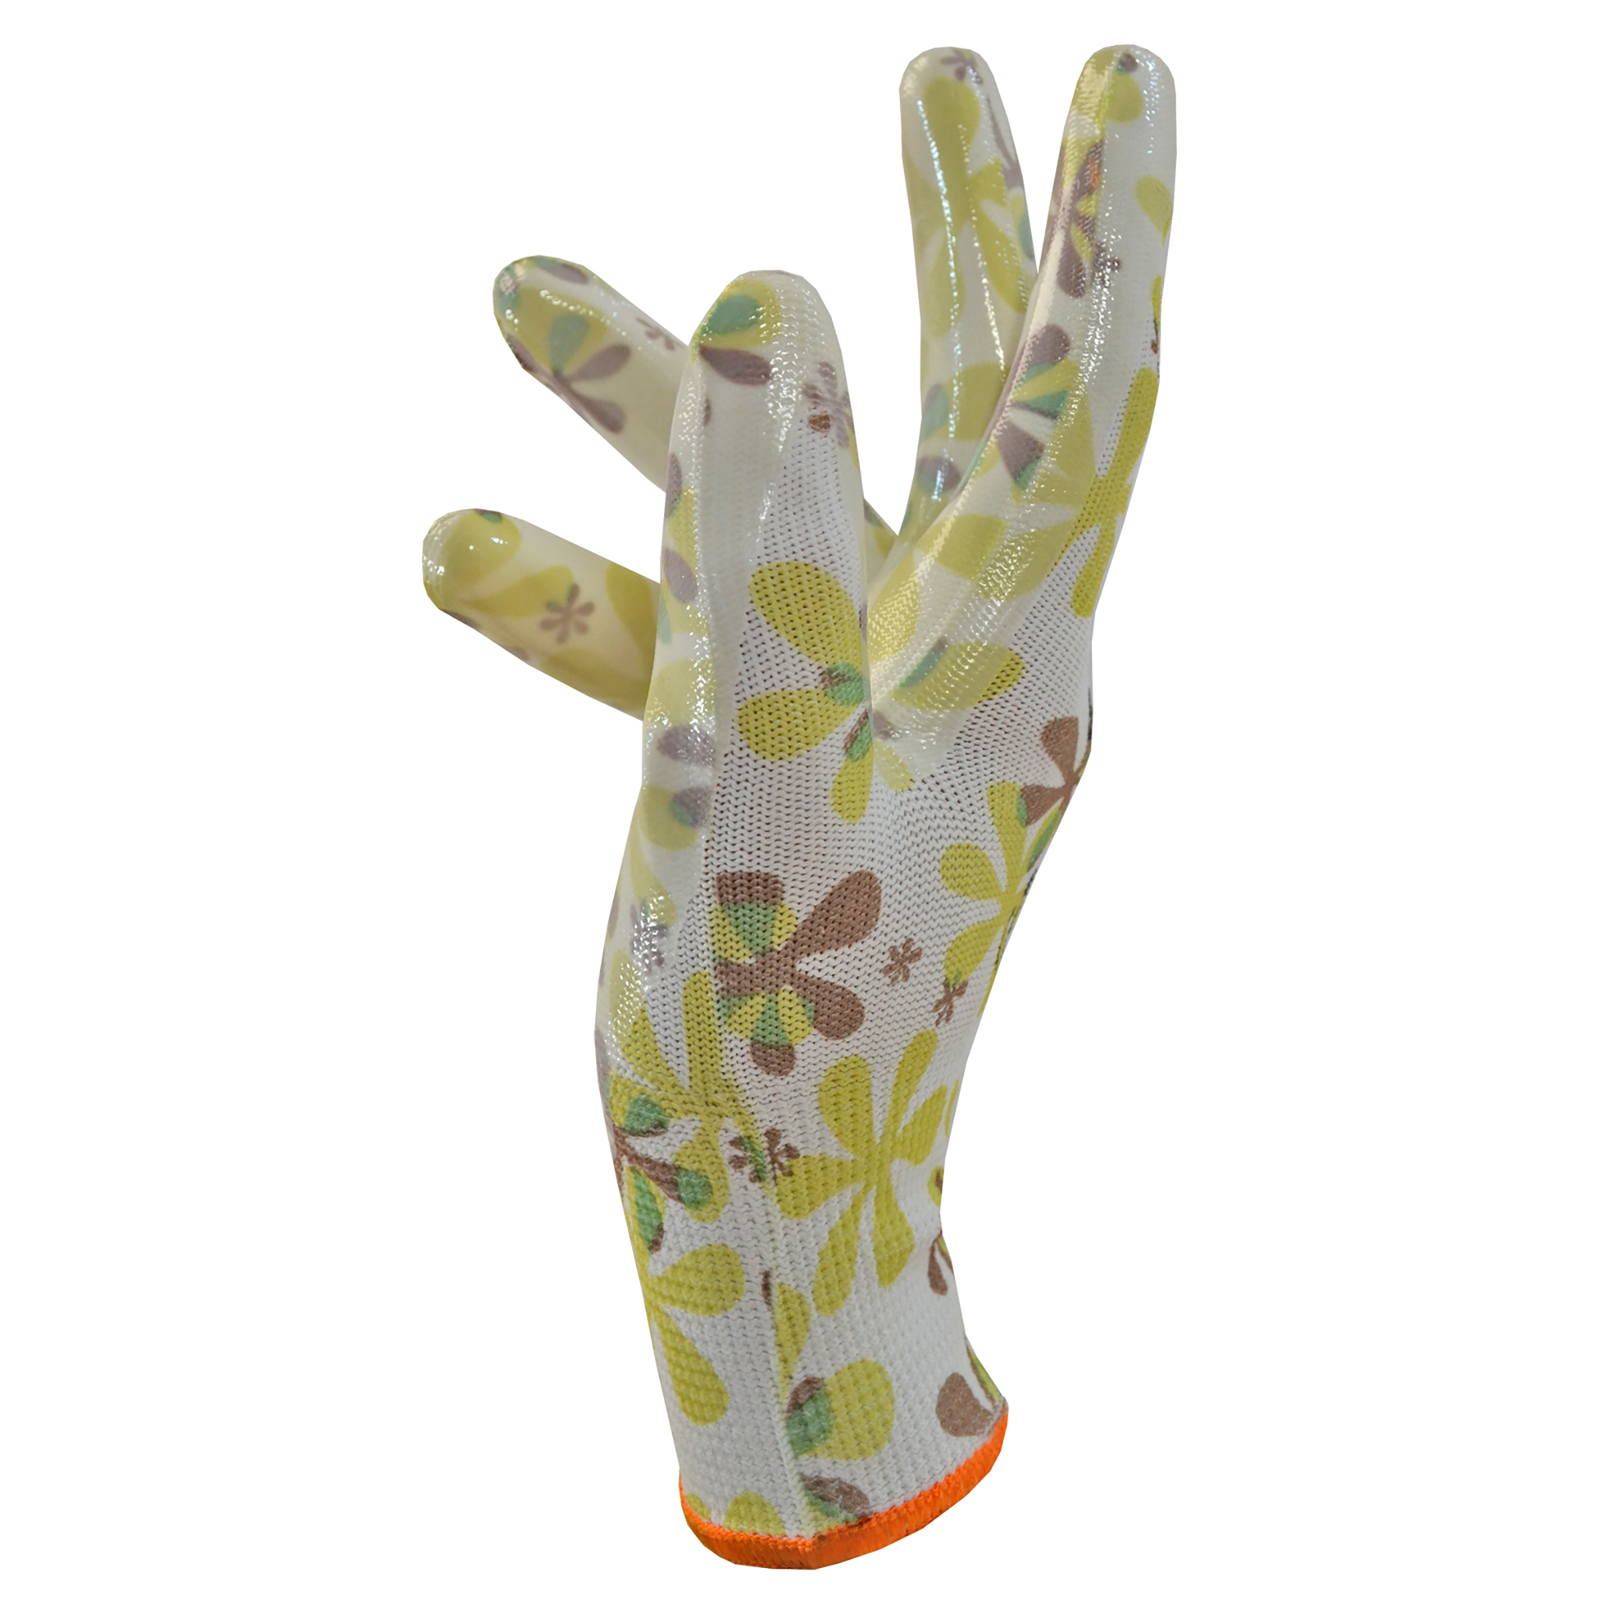 Light glove for women for gardening and landscaping printed with flowers and coated with nitrile dipped